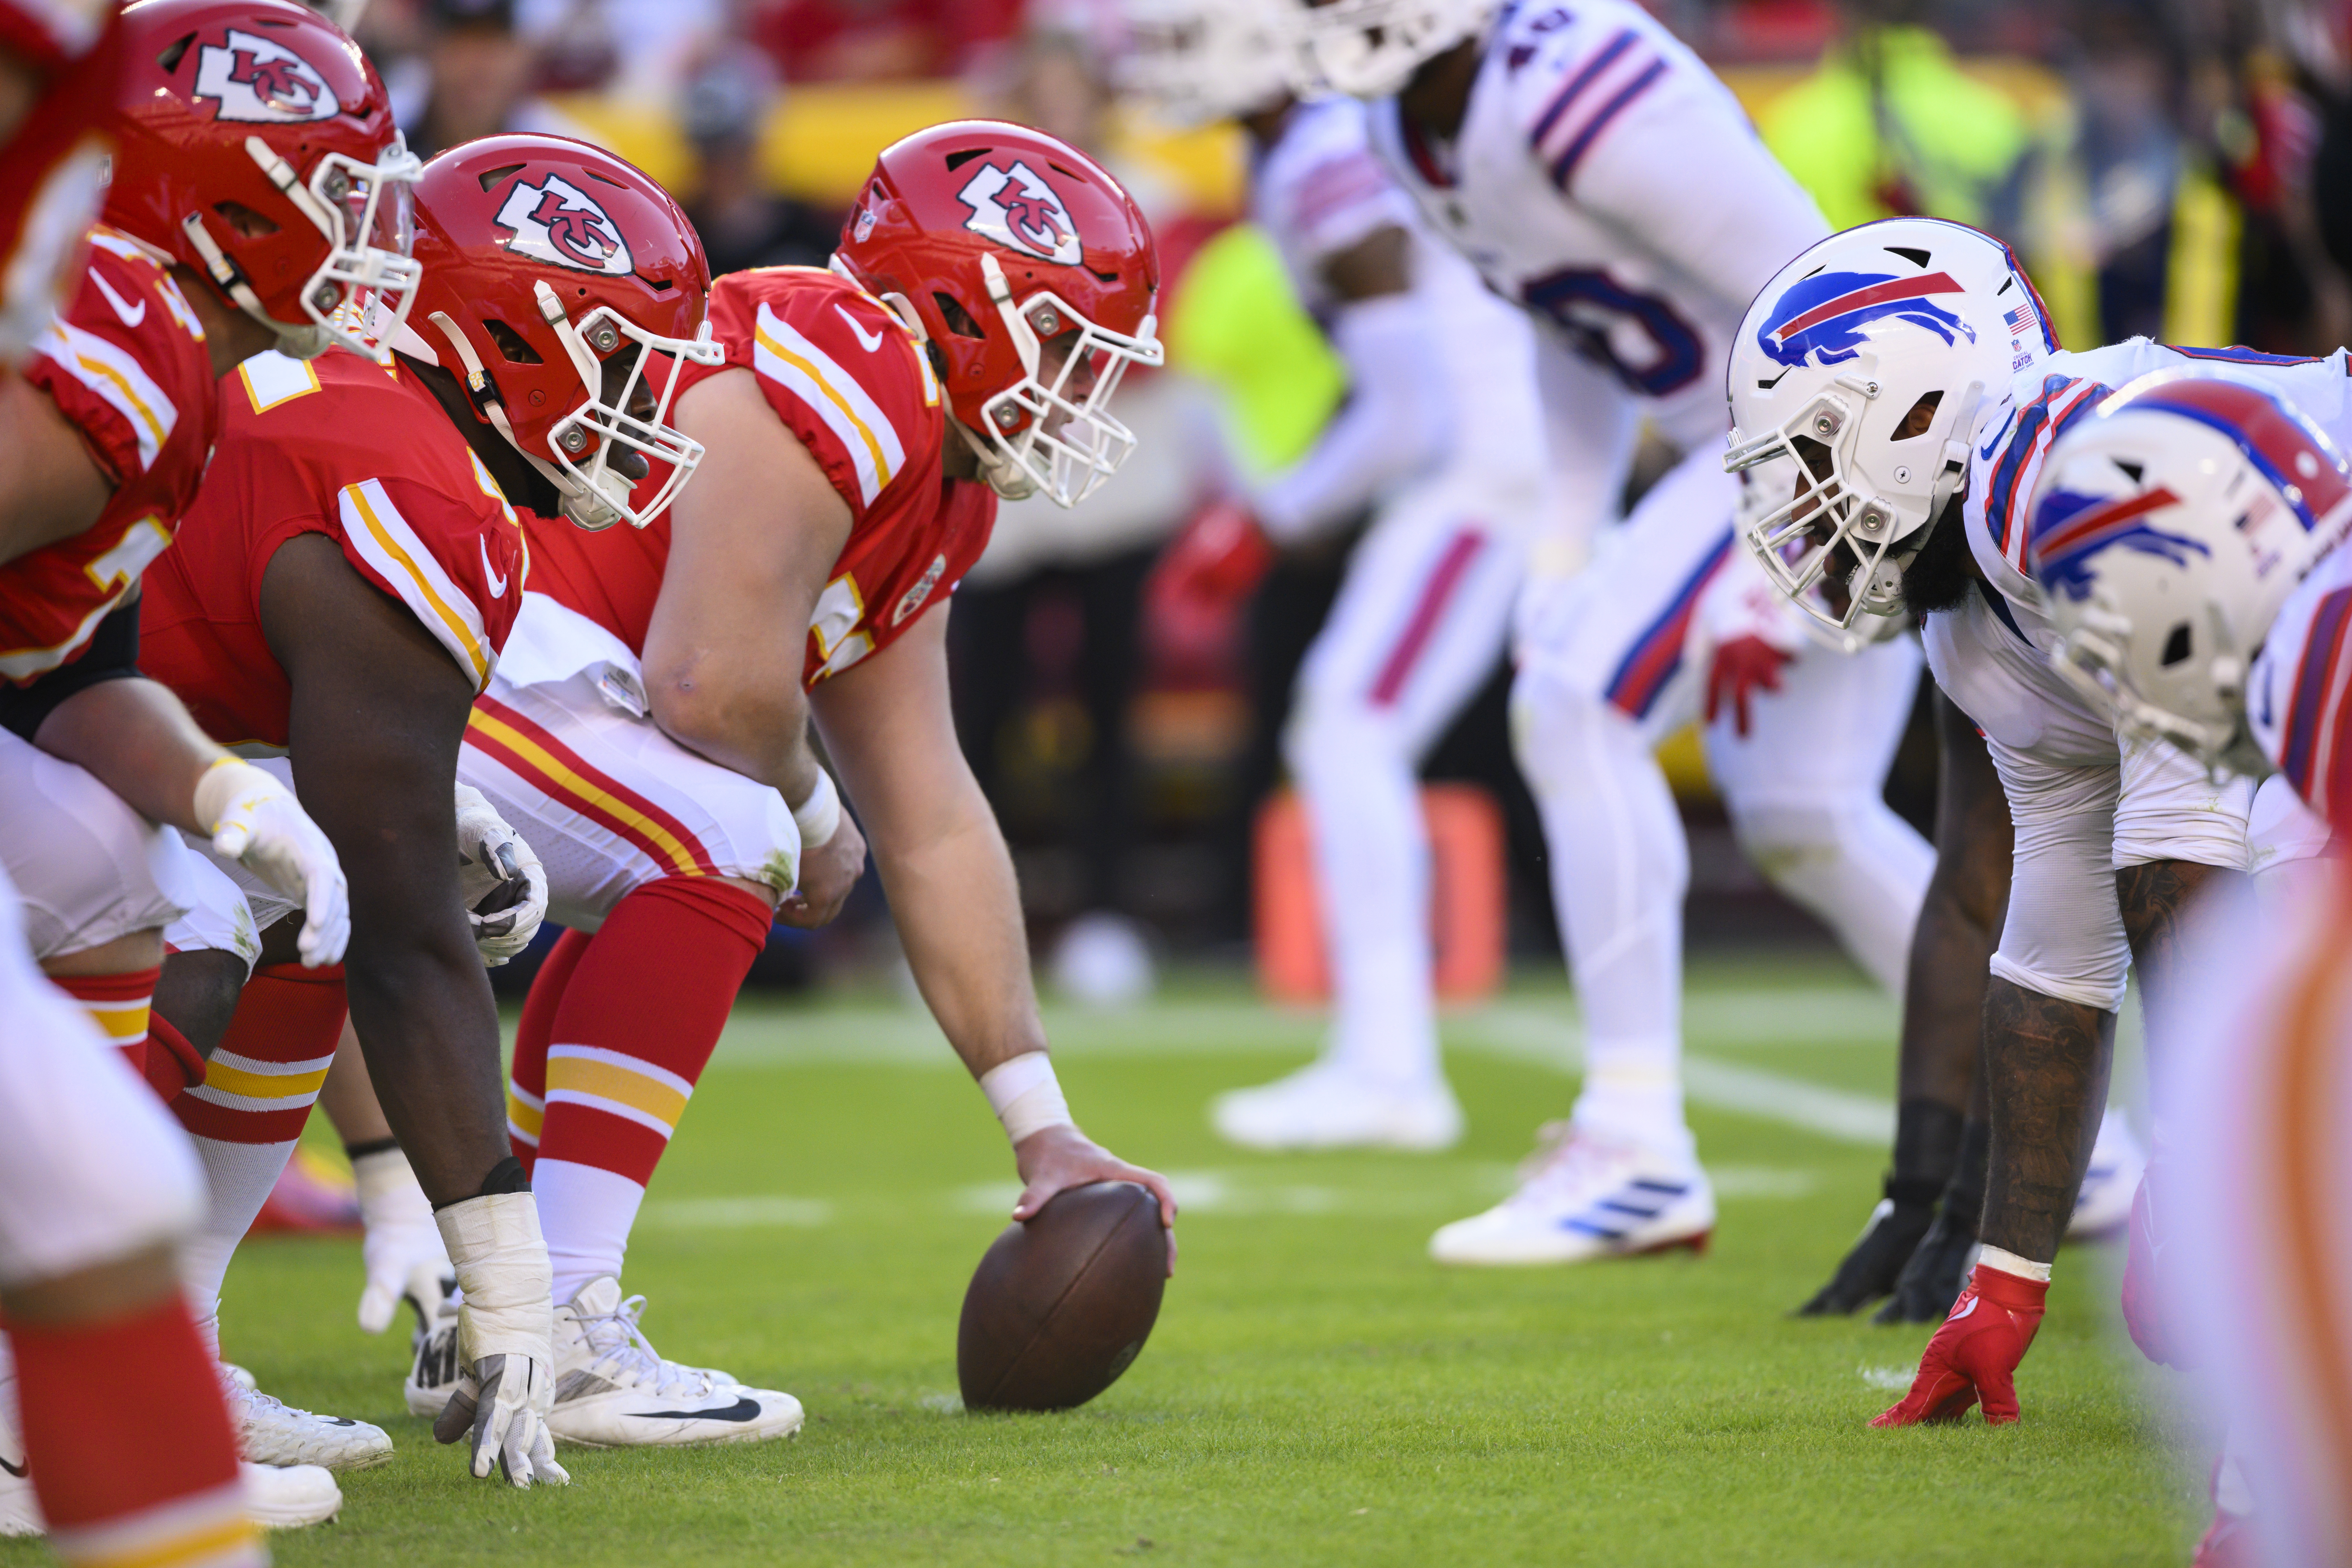 Bills rally to beat Chiefs 24-20 in playoff rematch